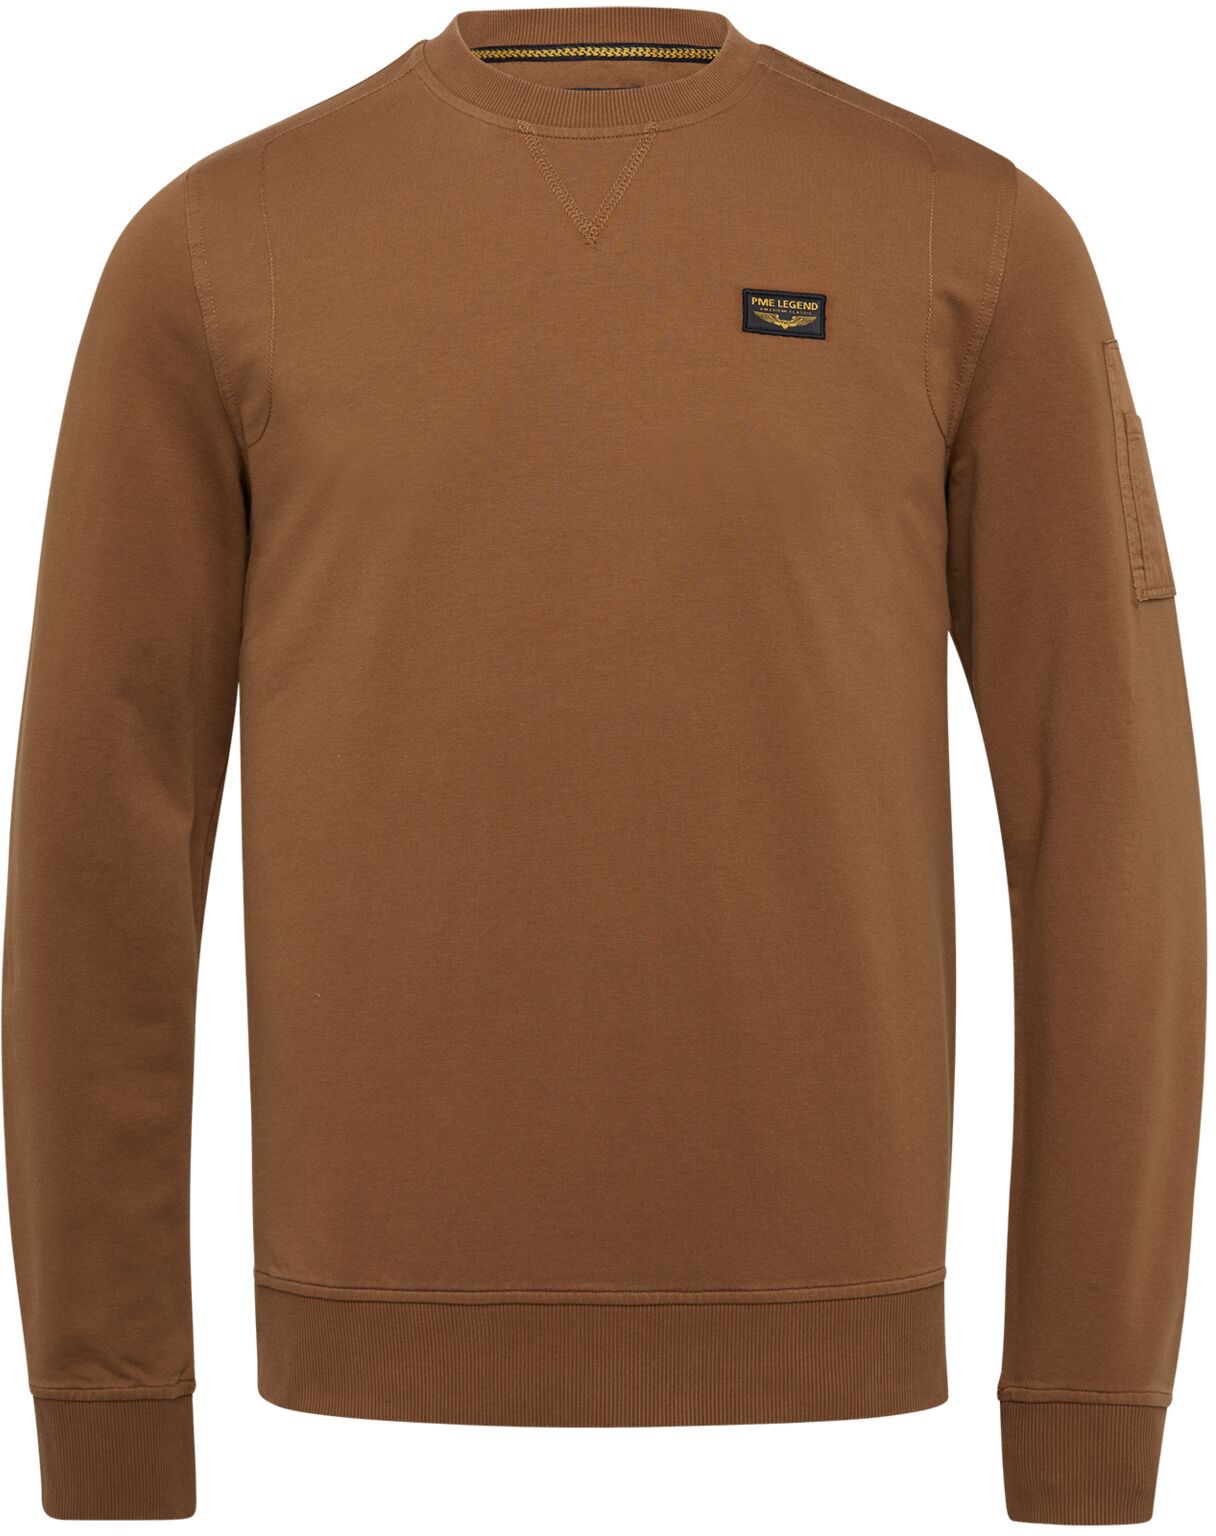 PME Legend Airstrip Sweater Toffee Brown size 3XL